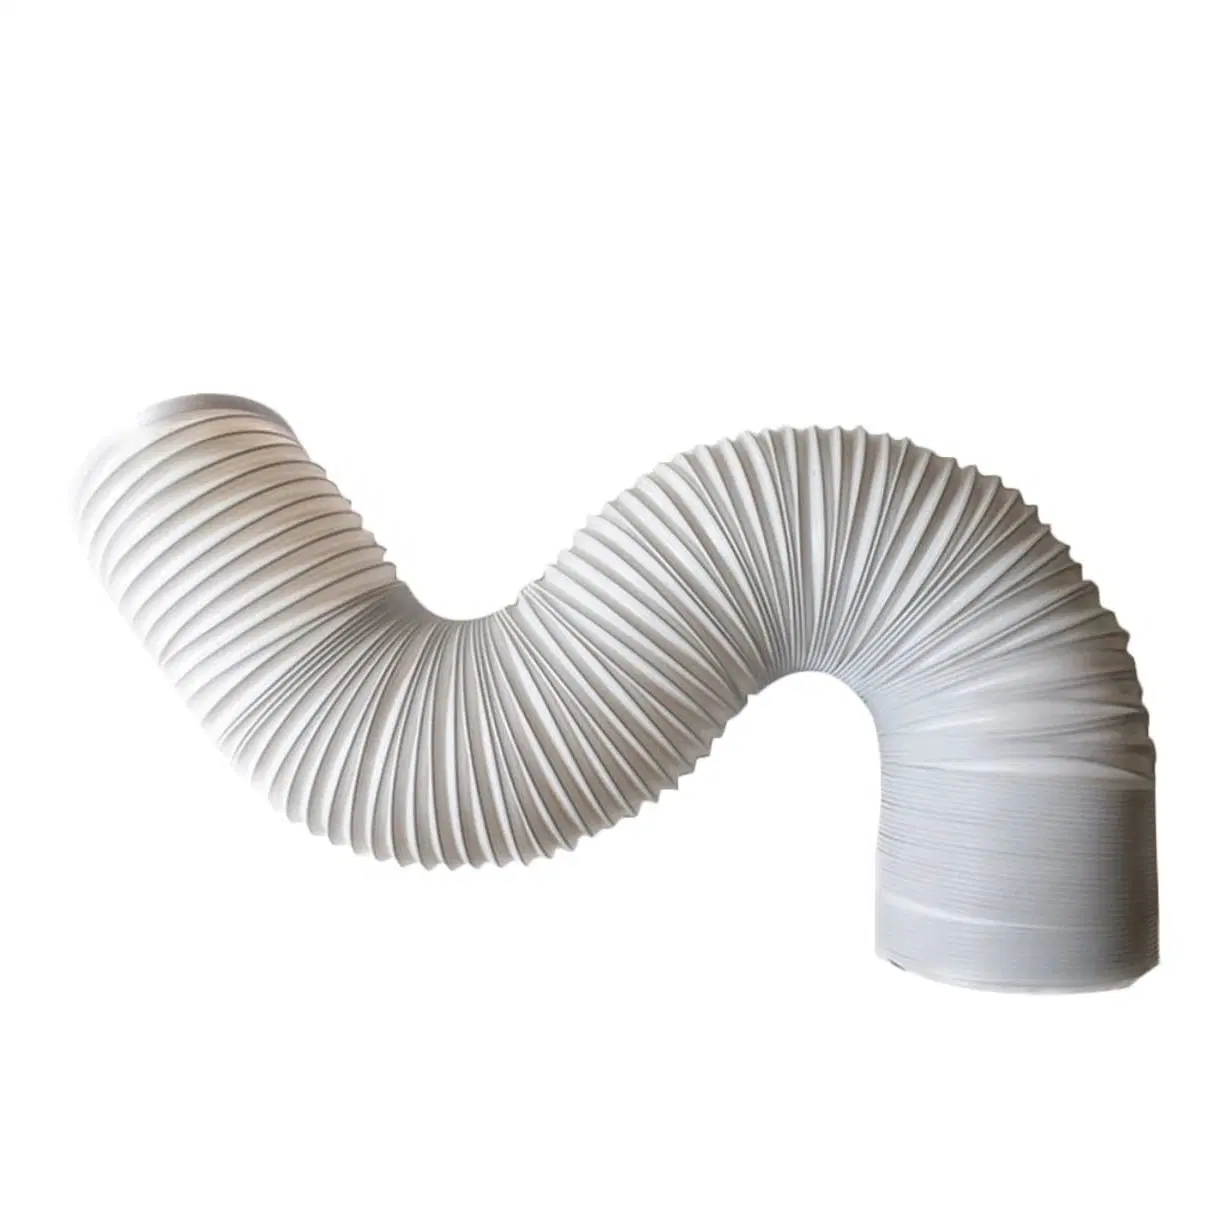 Manufacturers PP Air Conditioning Ventilation Hose Flexible Furnace Vent Pipe Air Duct